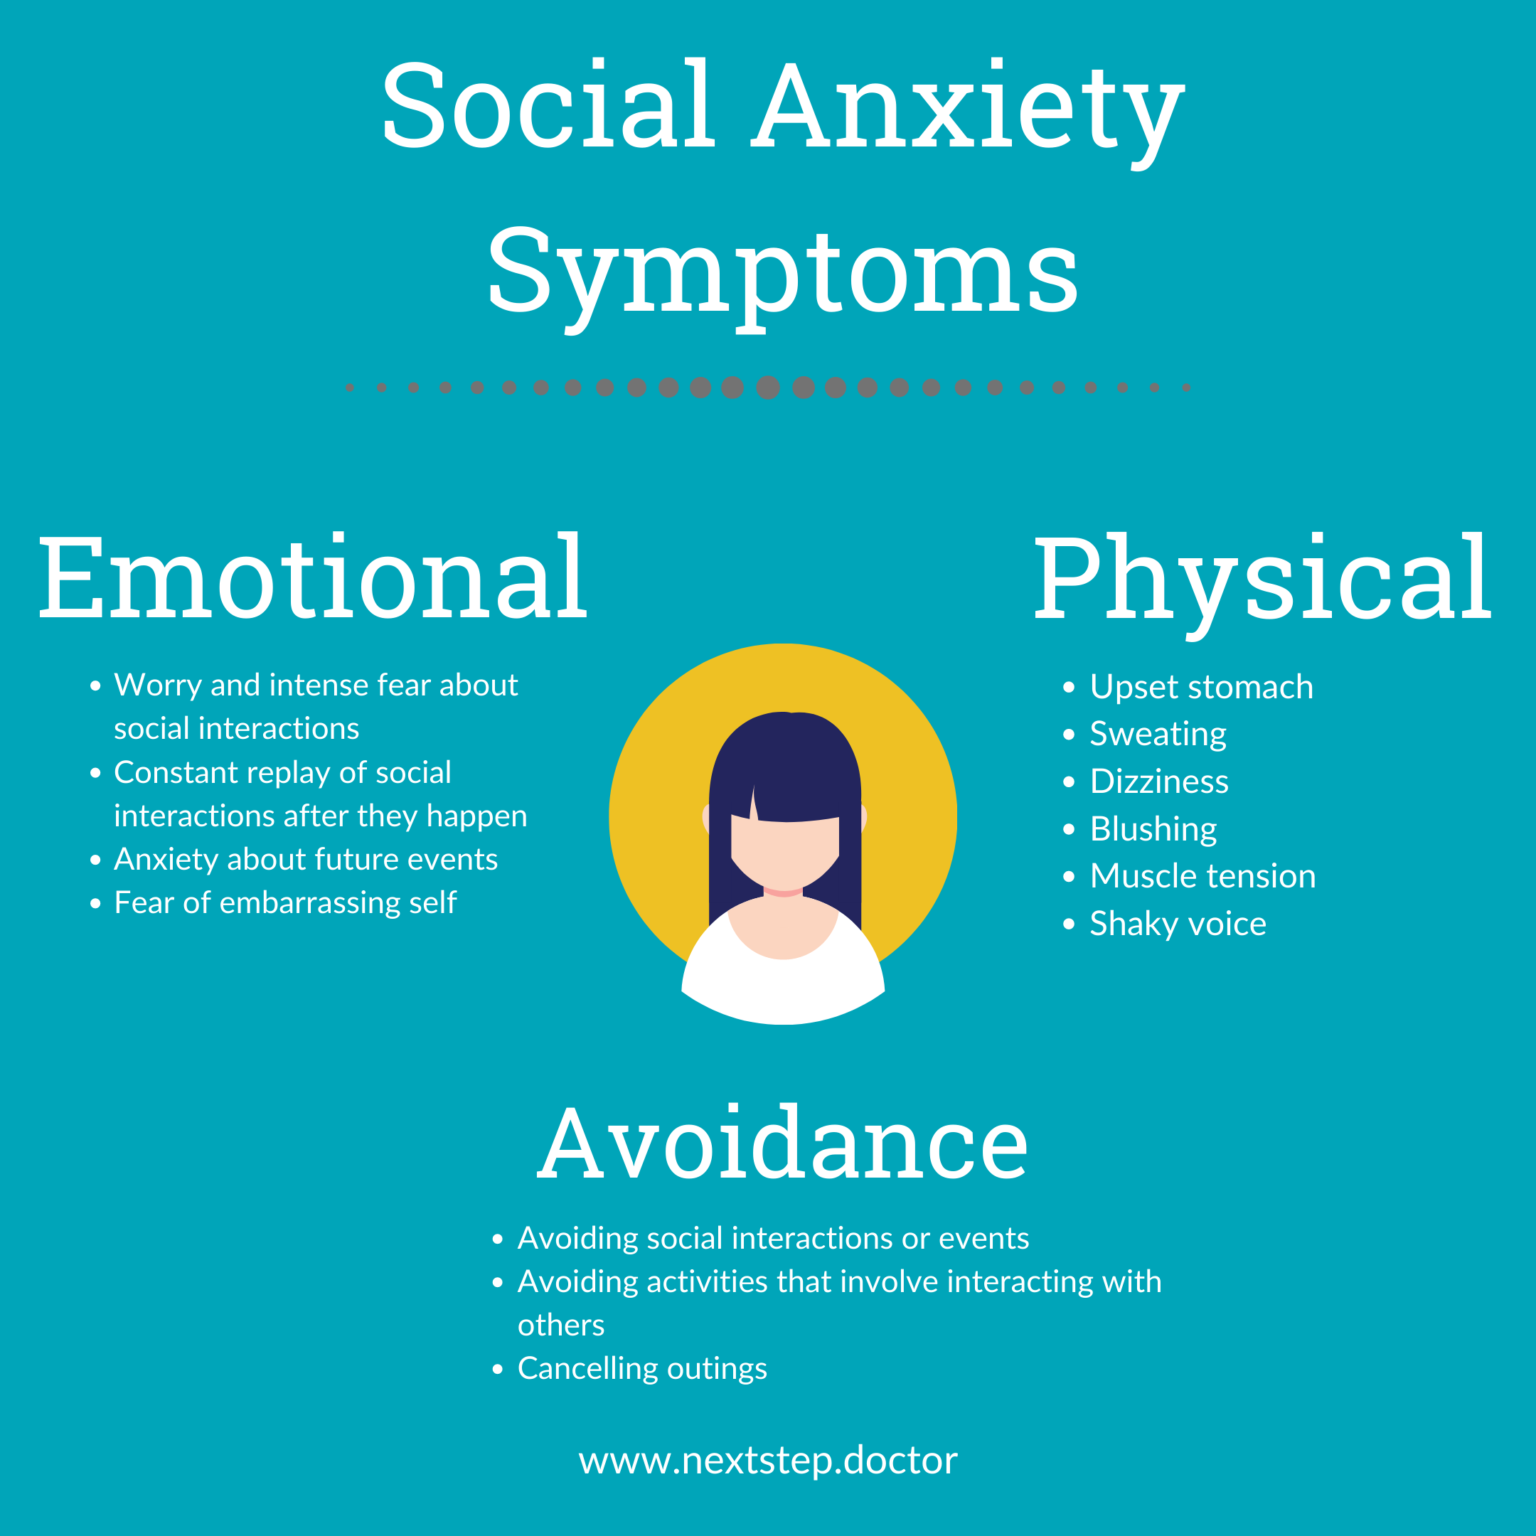 How to Tell If You Have a Social Anxiety Disorder